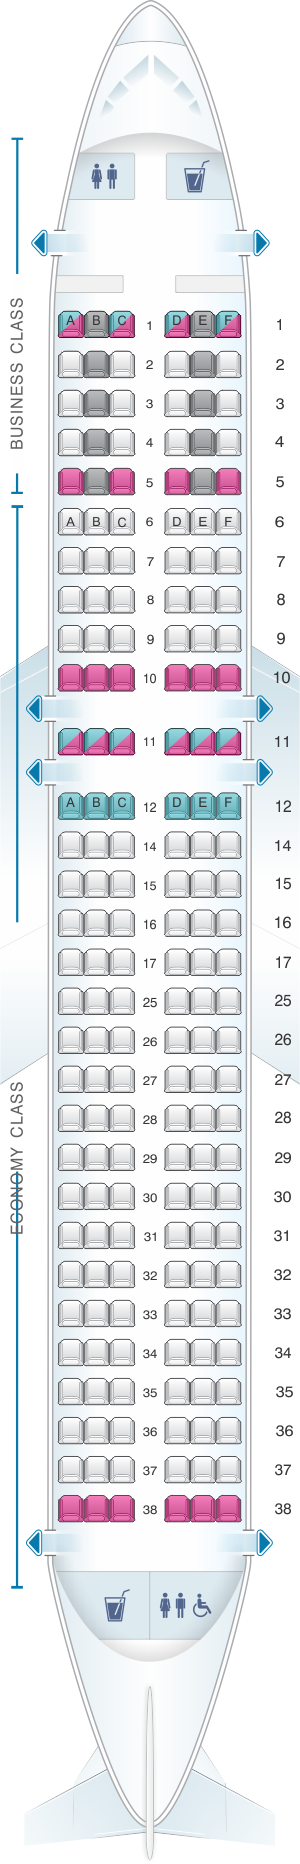 Airbus A320 Seat Map | Color 2018